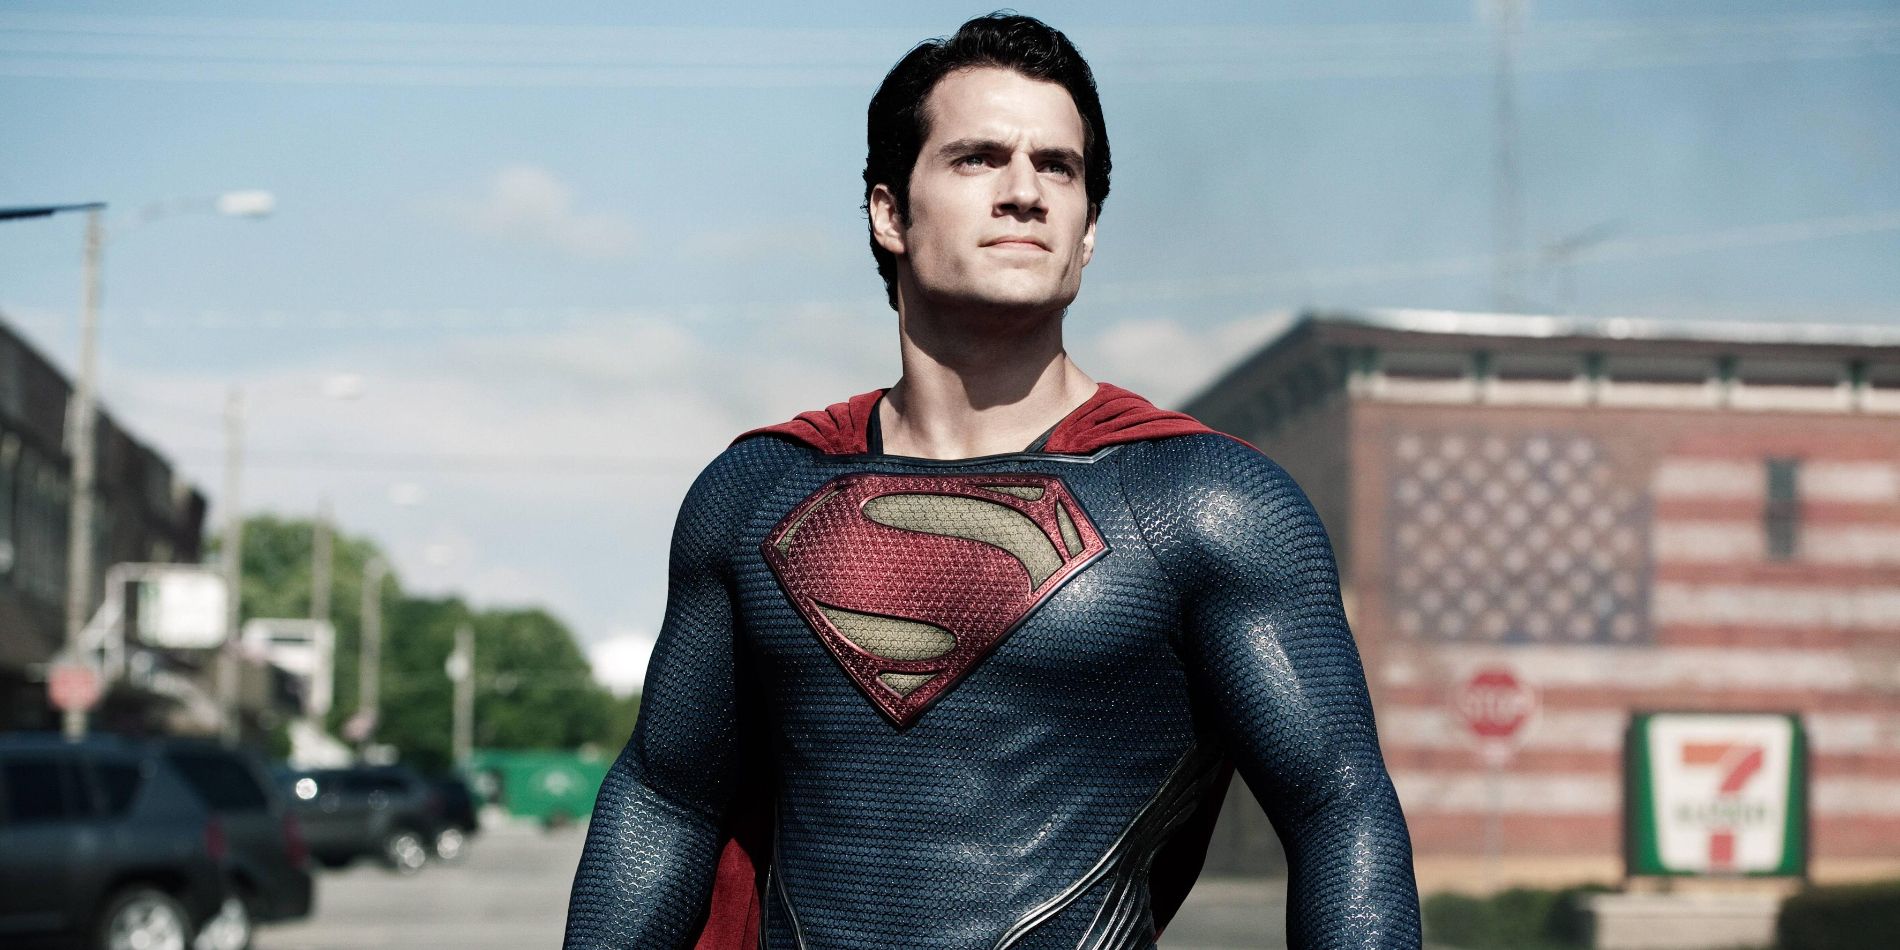 How DCEU’s Supergirl Costume Compares To Henry Cavill’s Superman Suit